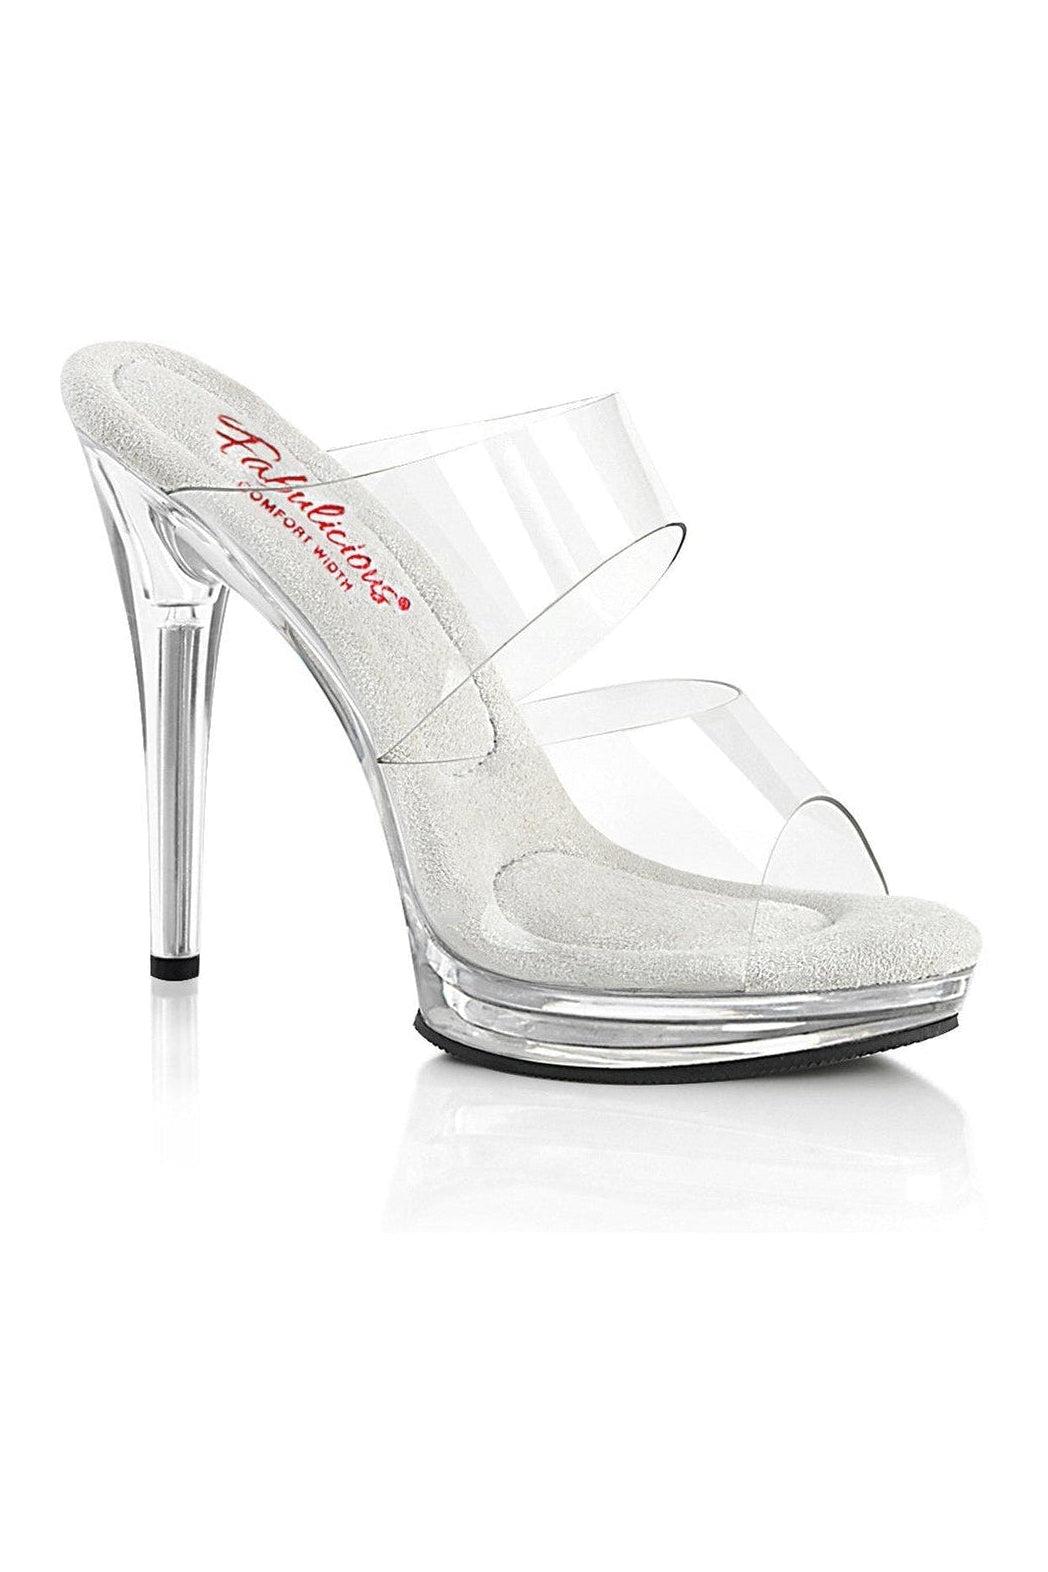 GLORY-502 Slide | Clear Vinyl-Slides-Fabulicious-Clear-6-Vinyl-SEXYSHOES.COM